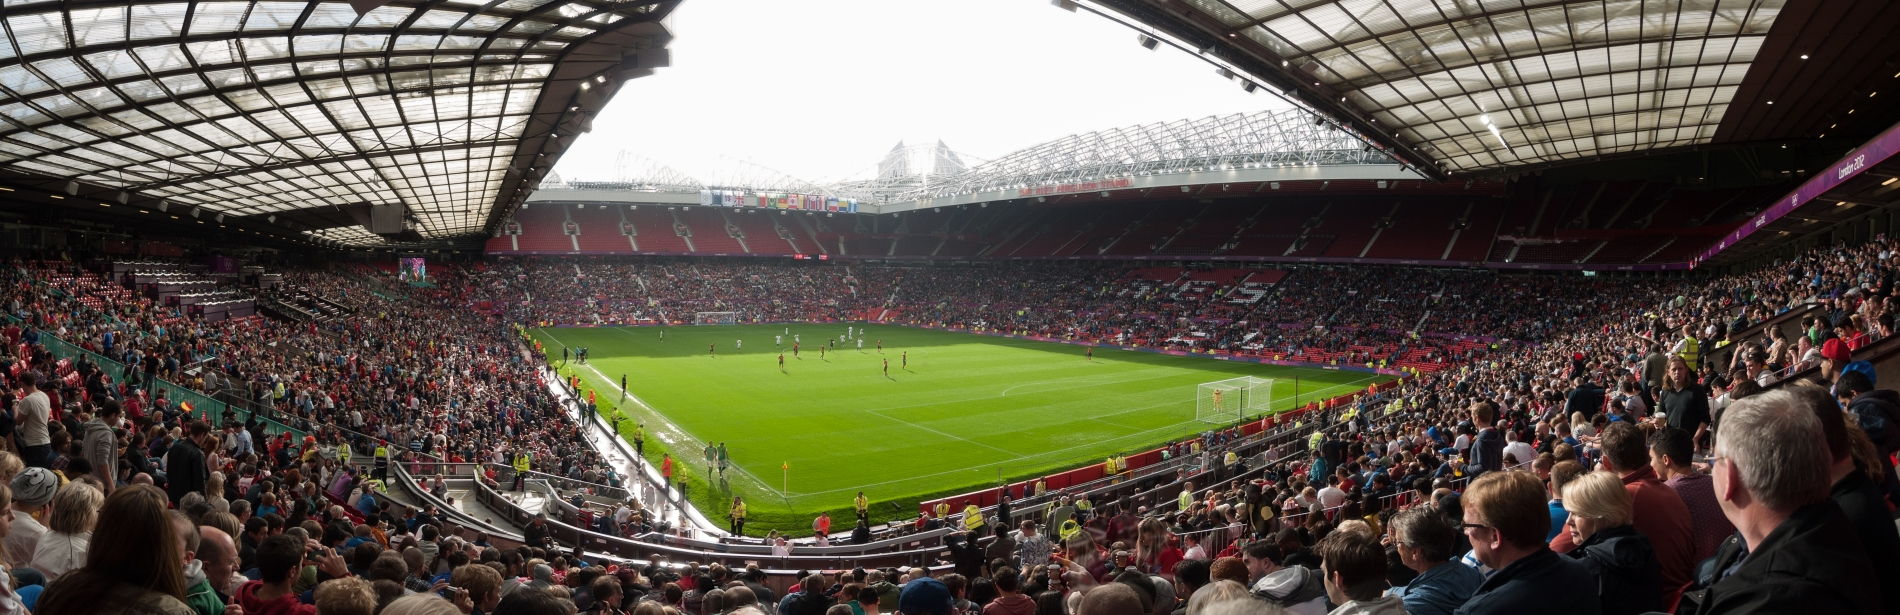 Hotels near Old Trafford Football Ground | Manchester | Best ...